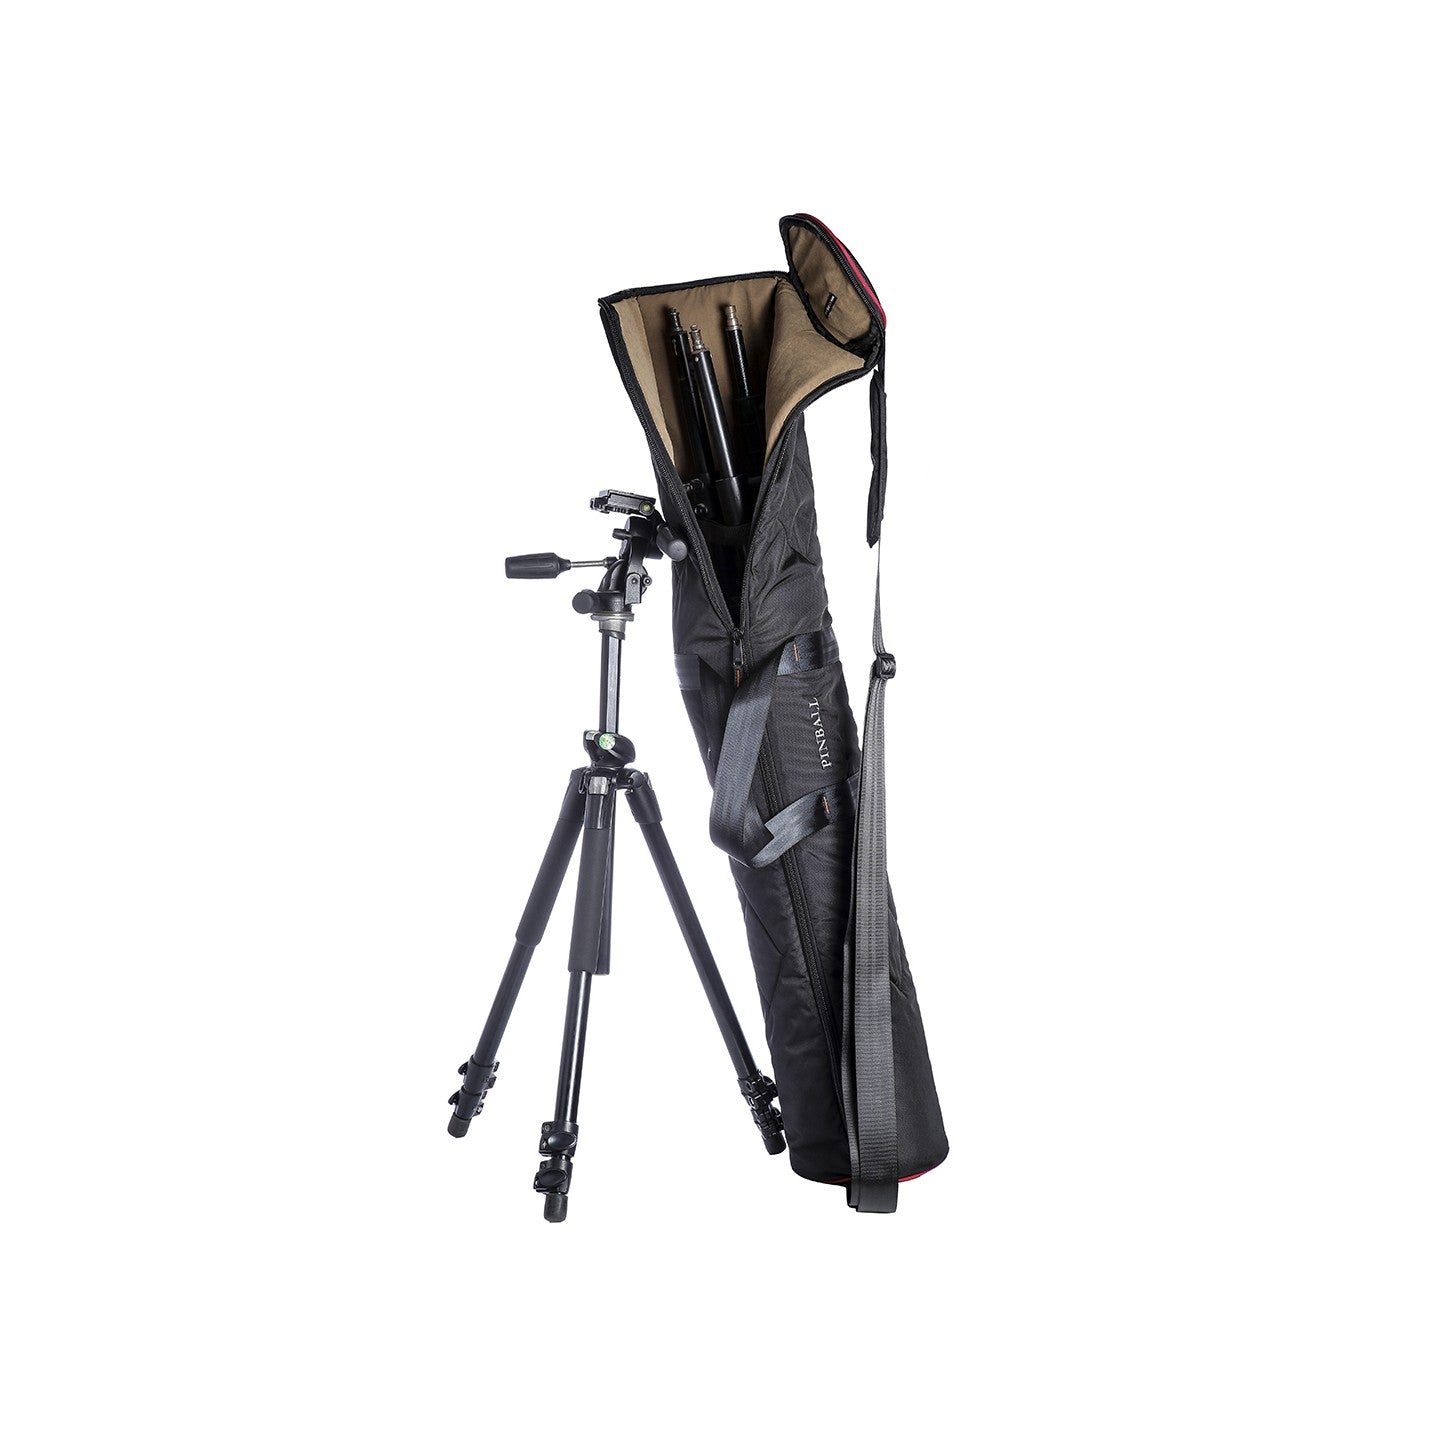 Mario-4 Light Stand bag positioned alongside a tripod, showcasing its capacity to hold four 14-foot light stands.